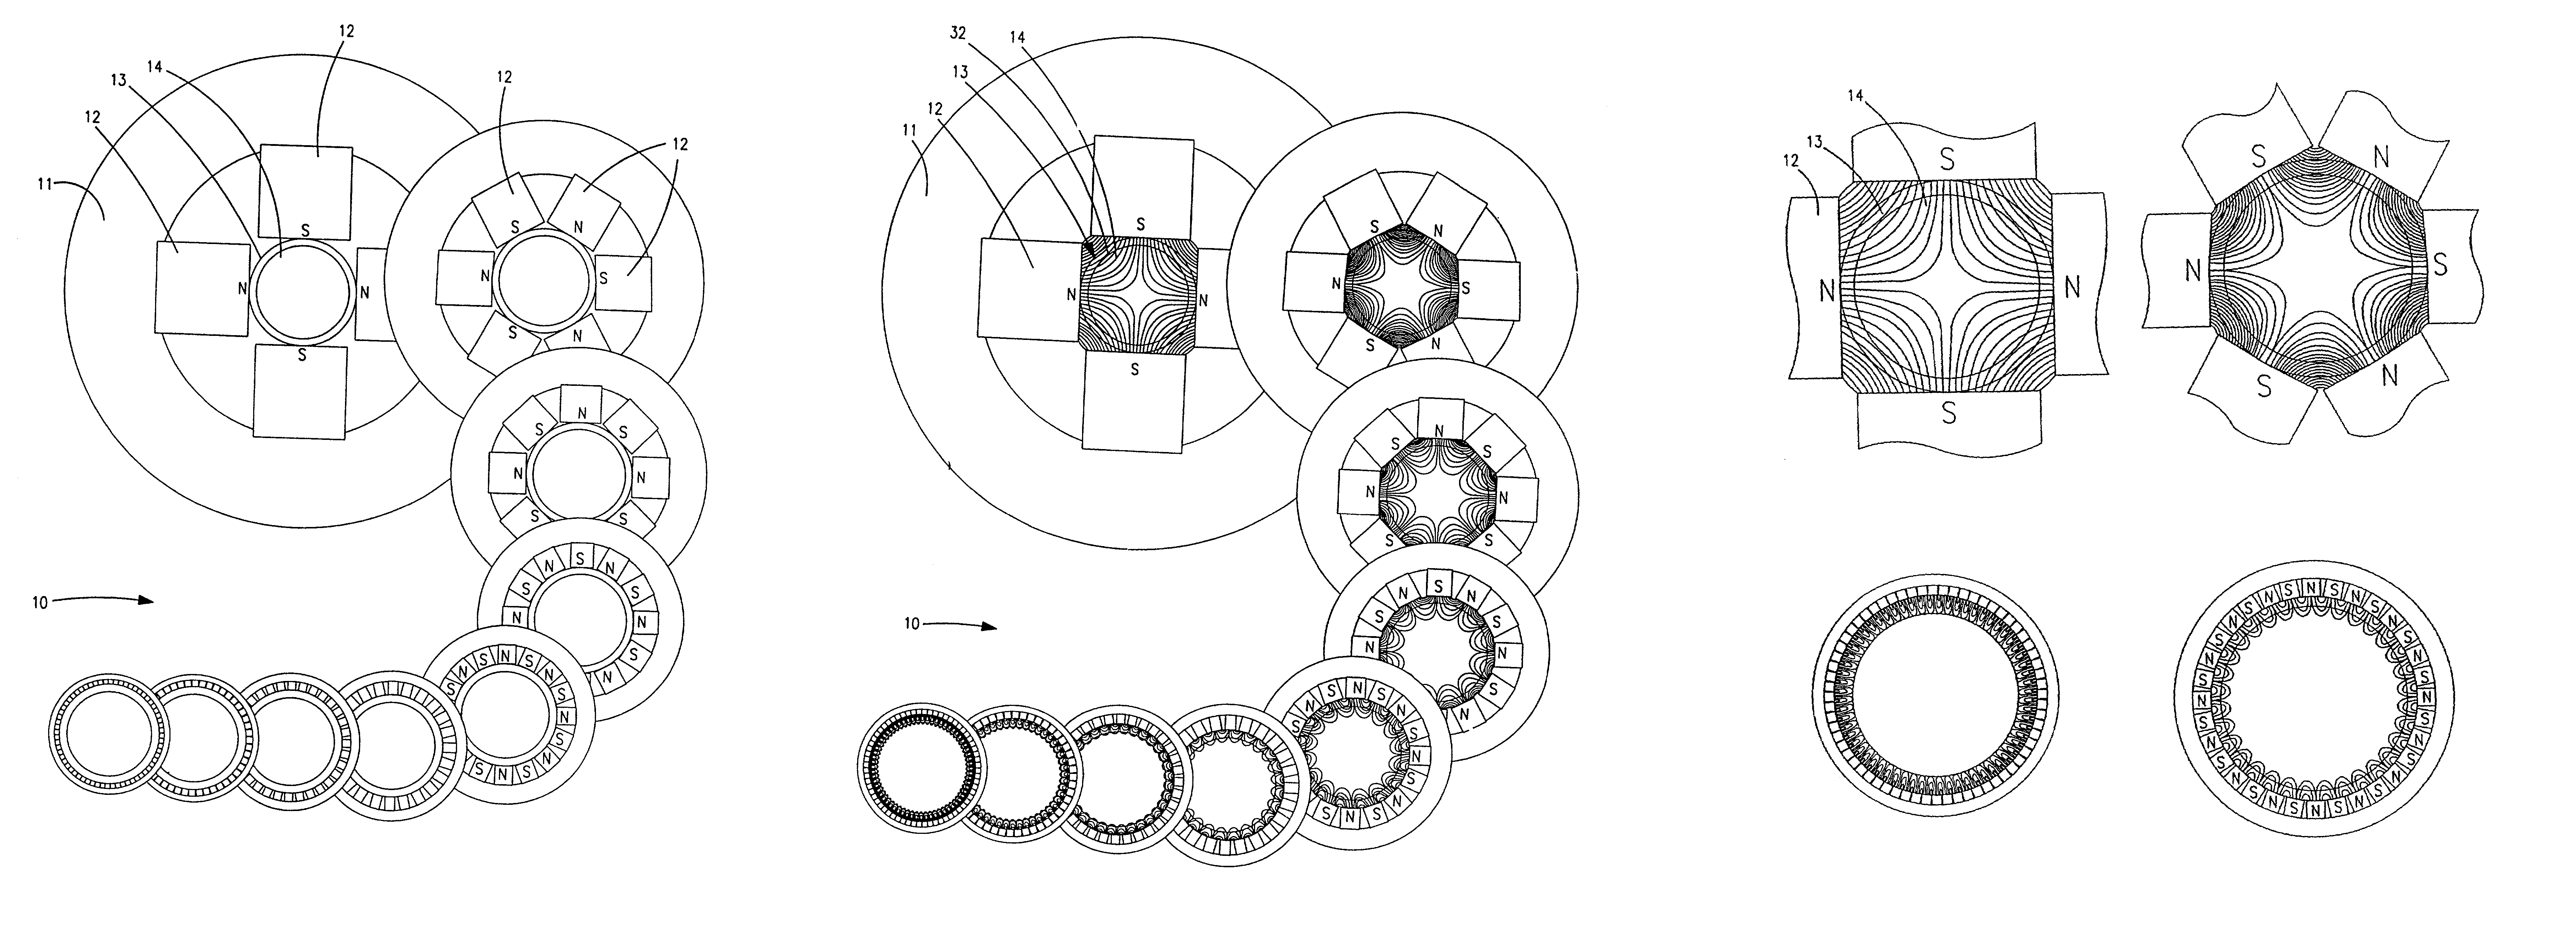 Apparatus and methods for magnetic separation